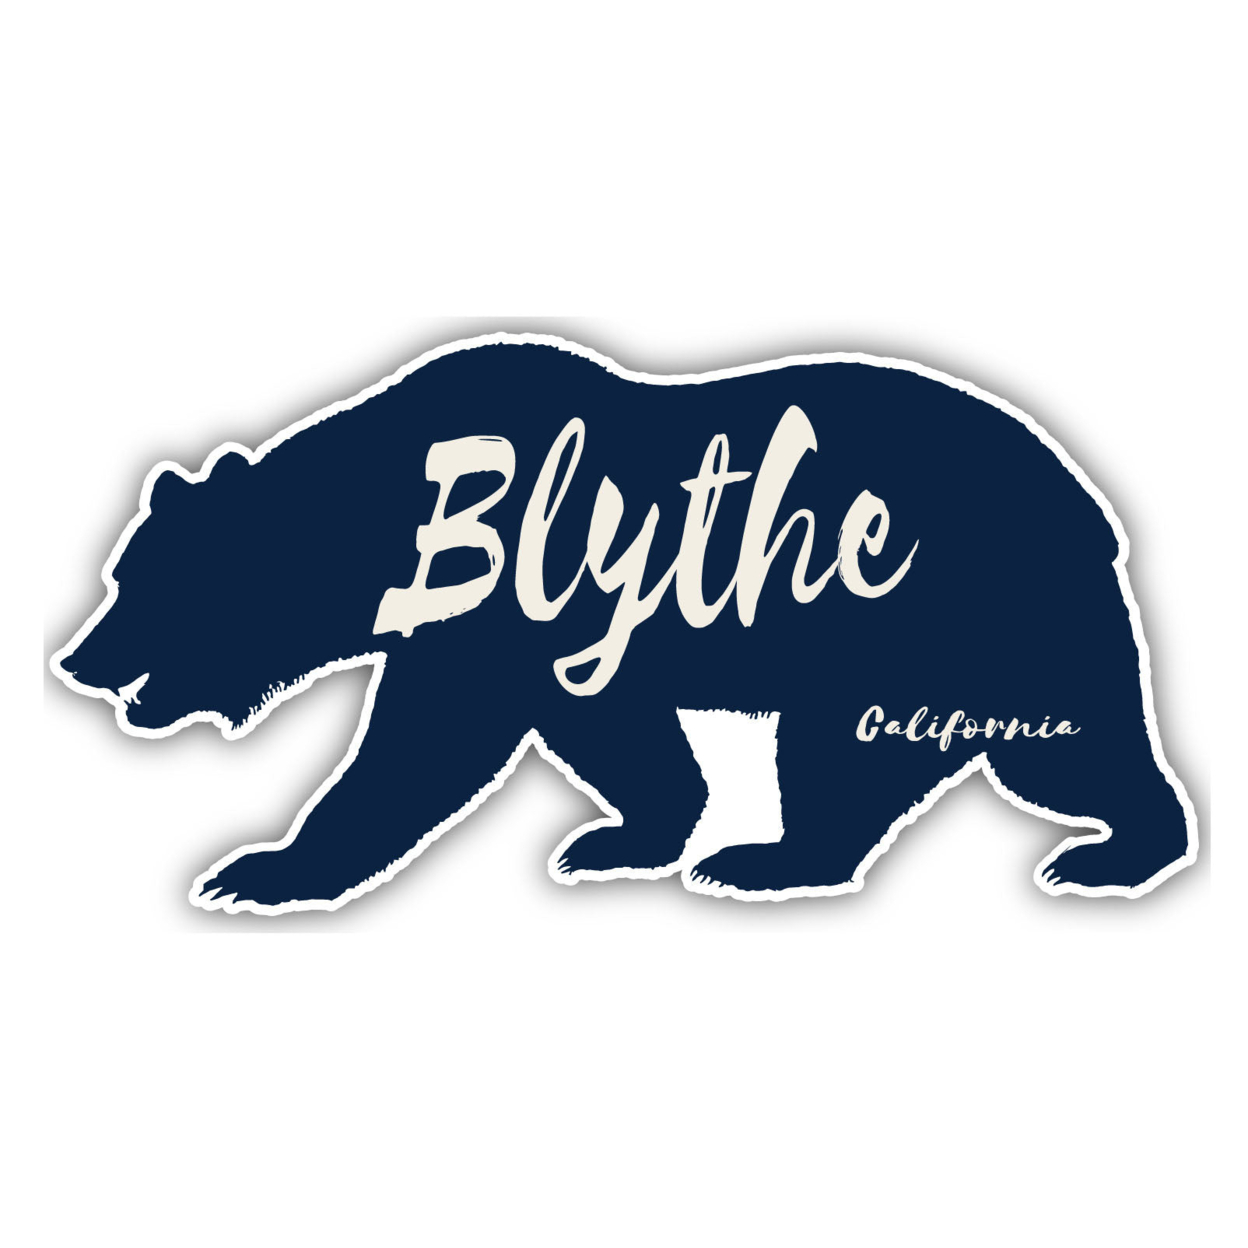 Blythe California Souvenir Decorative Stickers (Choose Theme And Size) - 4-Pack, 2-Inch, Bear